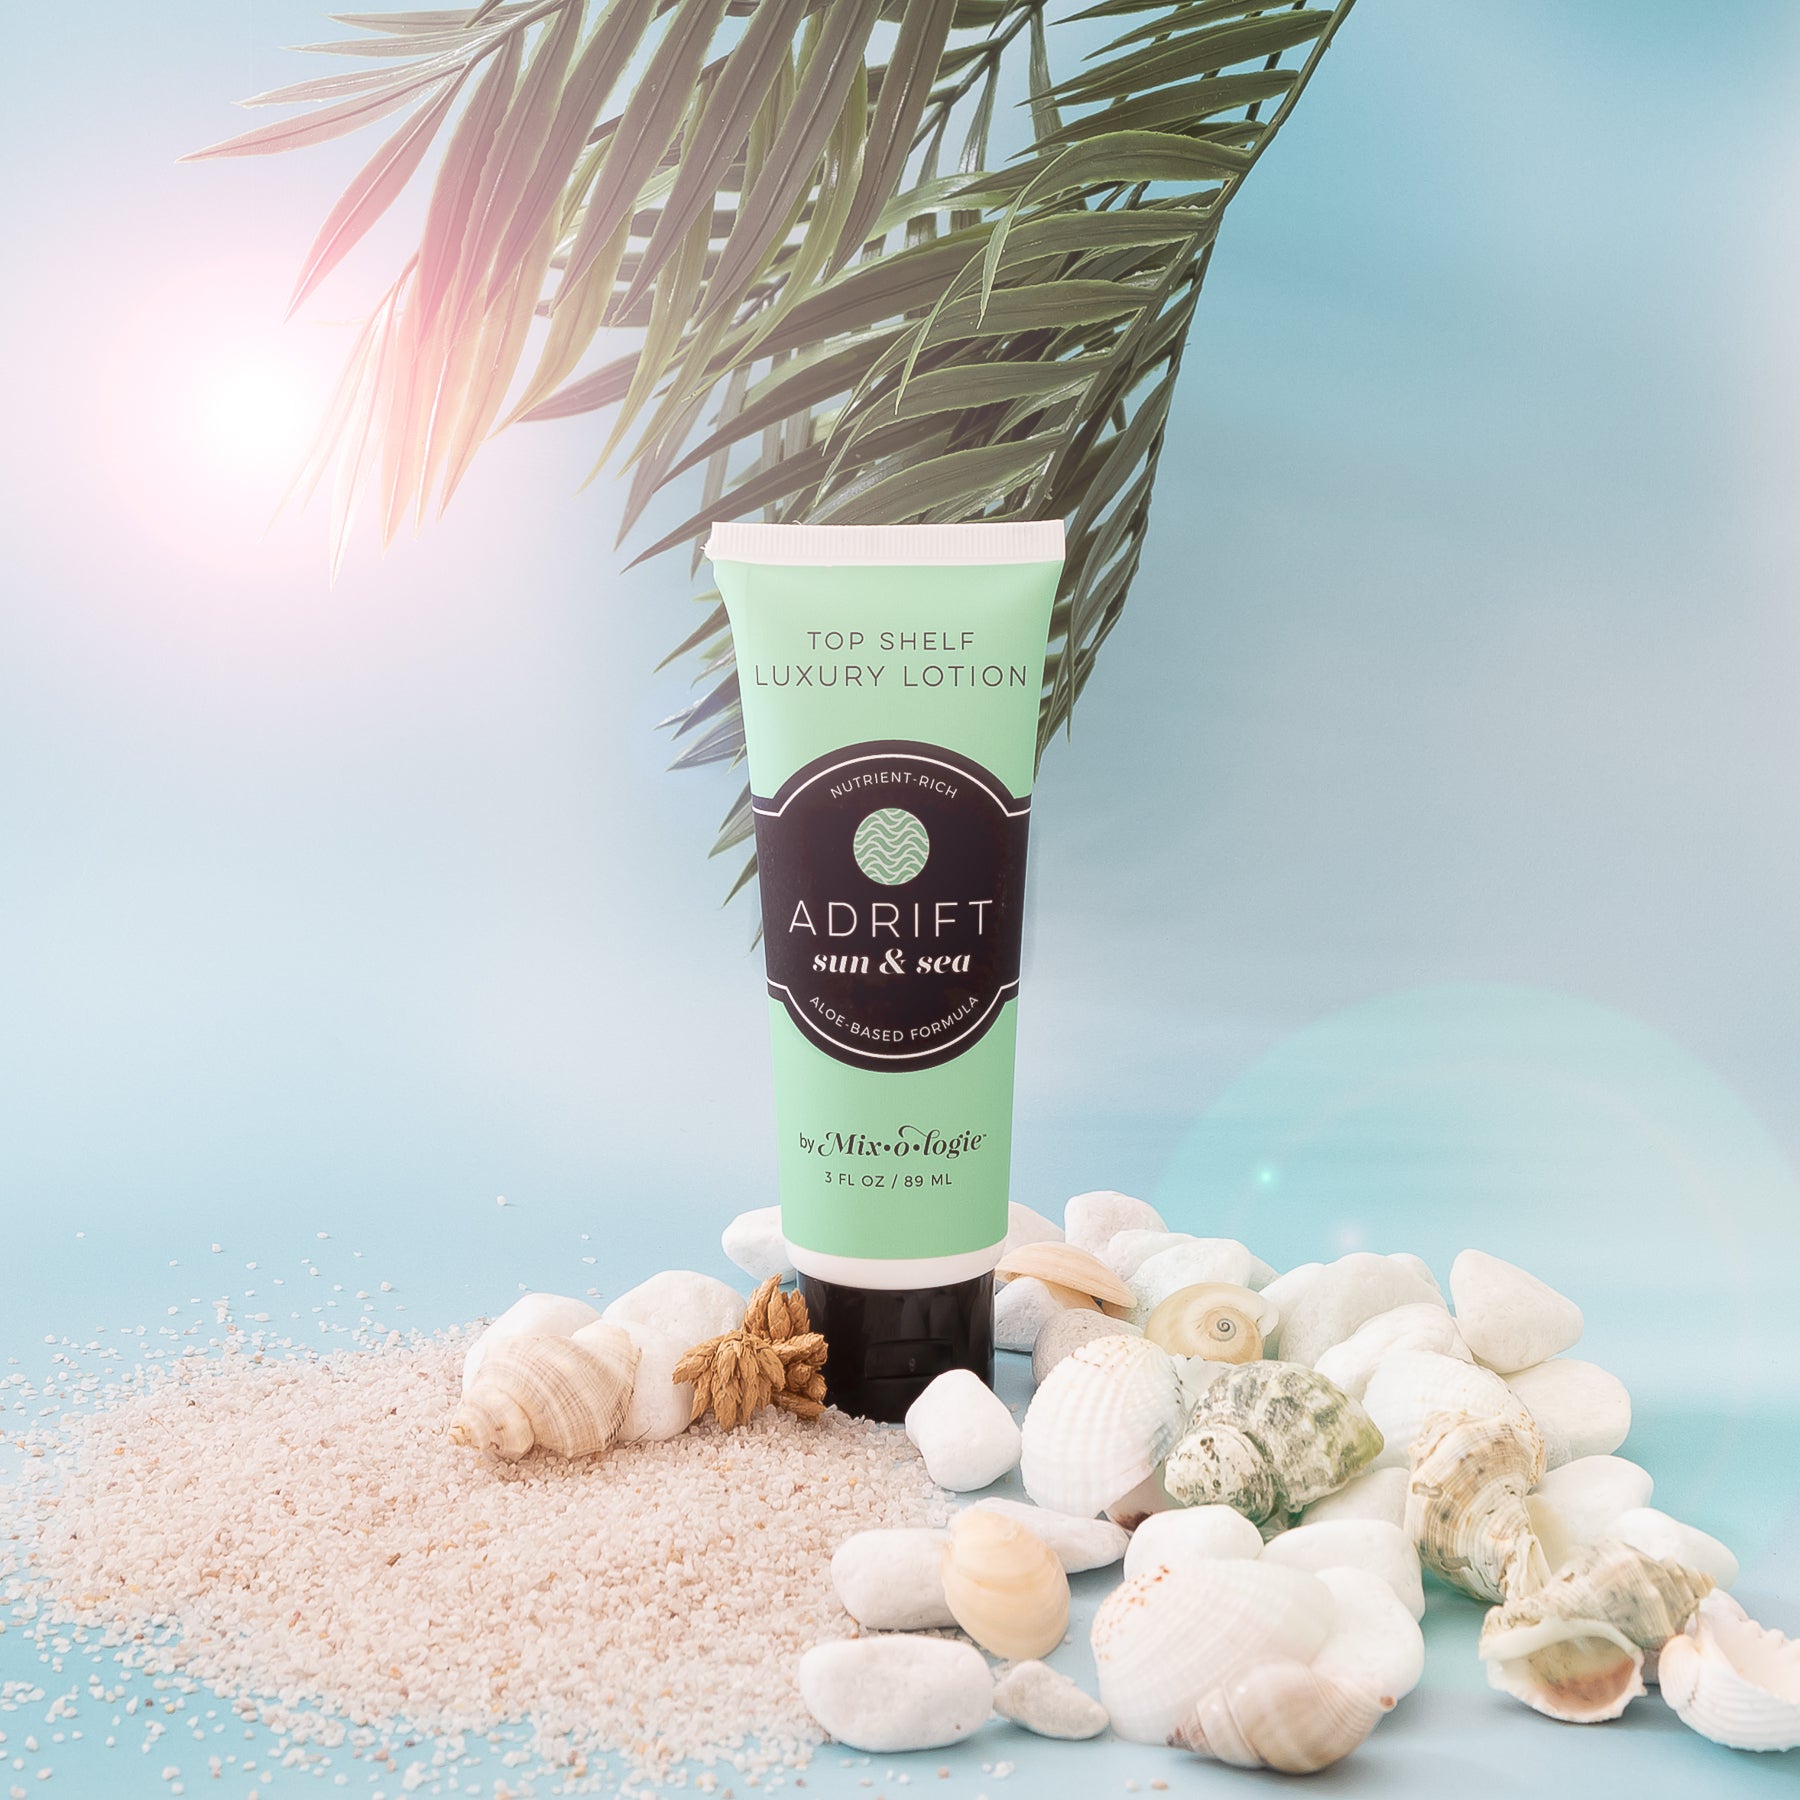 Adrift (Sun & Sea) Top shelf lotion in light green tube with black lid and label. Nutrient rich, aloe based formula, tube has 5 fl oz or 89 mL. Pictured with blue background, sand, seashells and green palm tree.